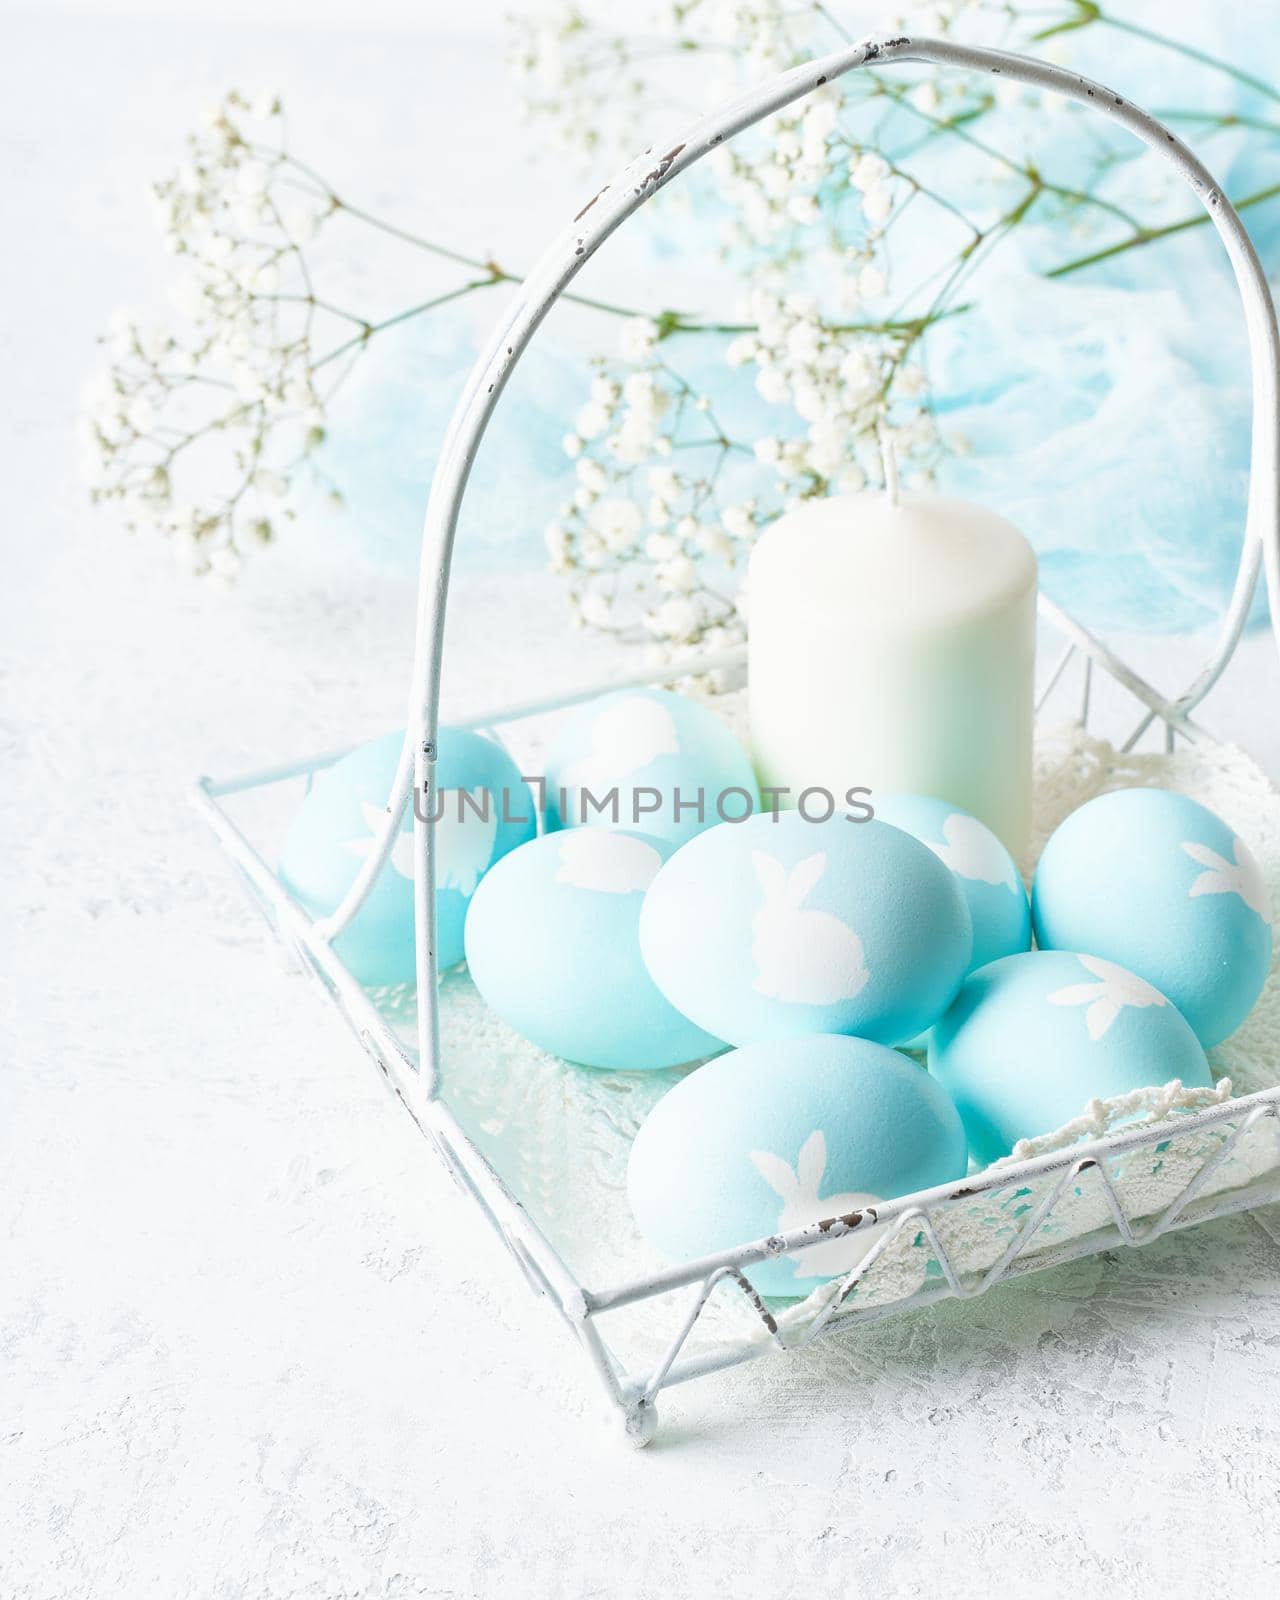 Easter. Holiday. Light white background, gentle pastel colors. Blue eggs with image of rabbit in basket. Flowers in background. Side view, vertical